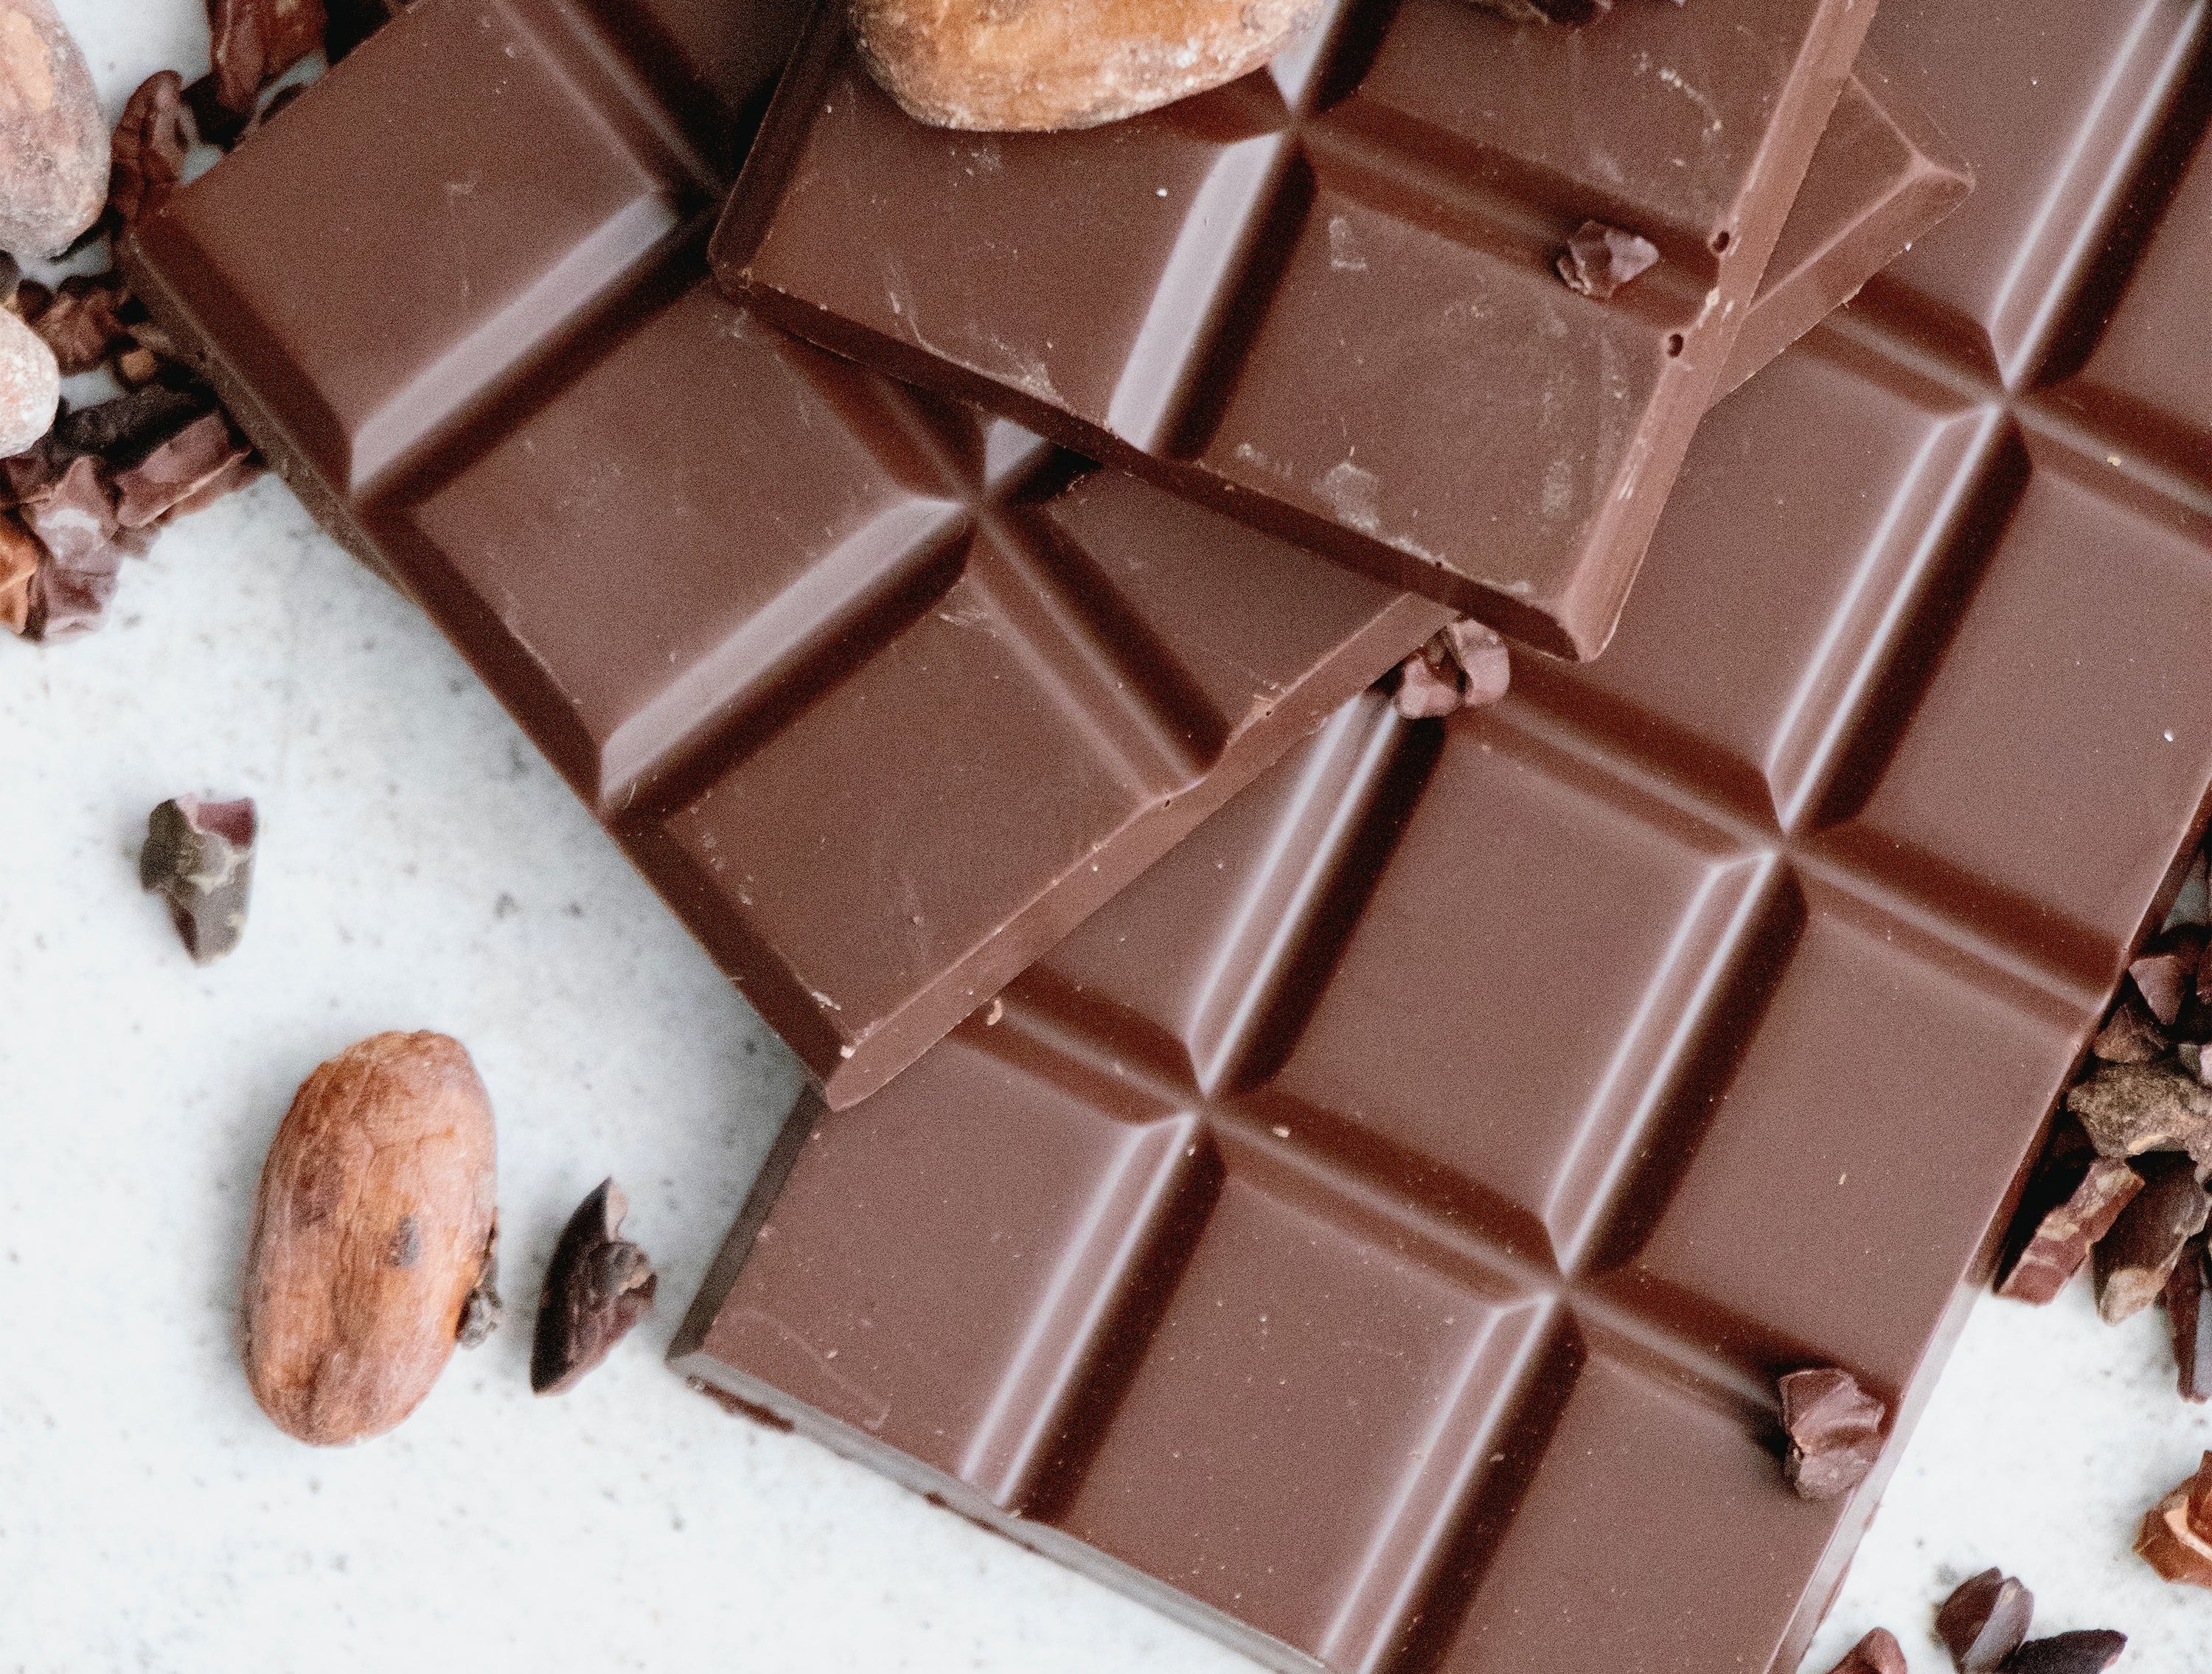 Chocolate bars and cacao beans